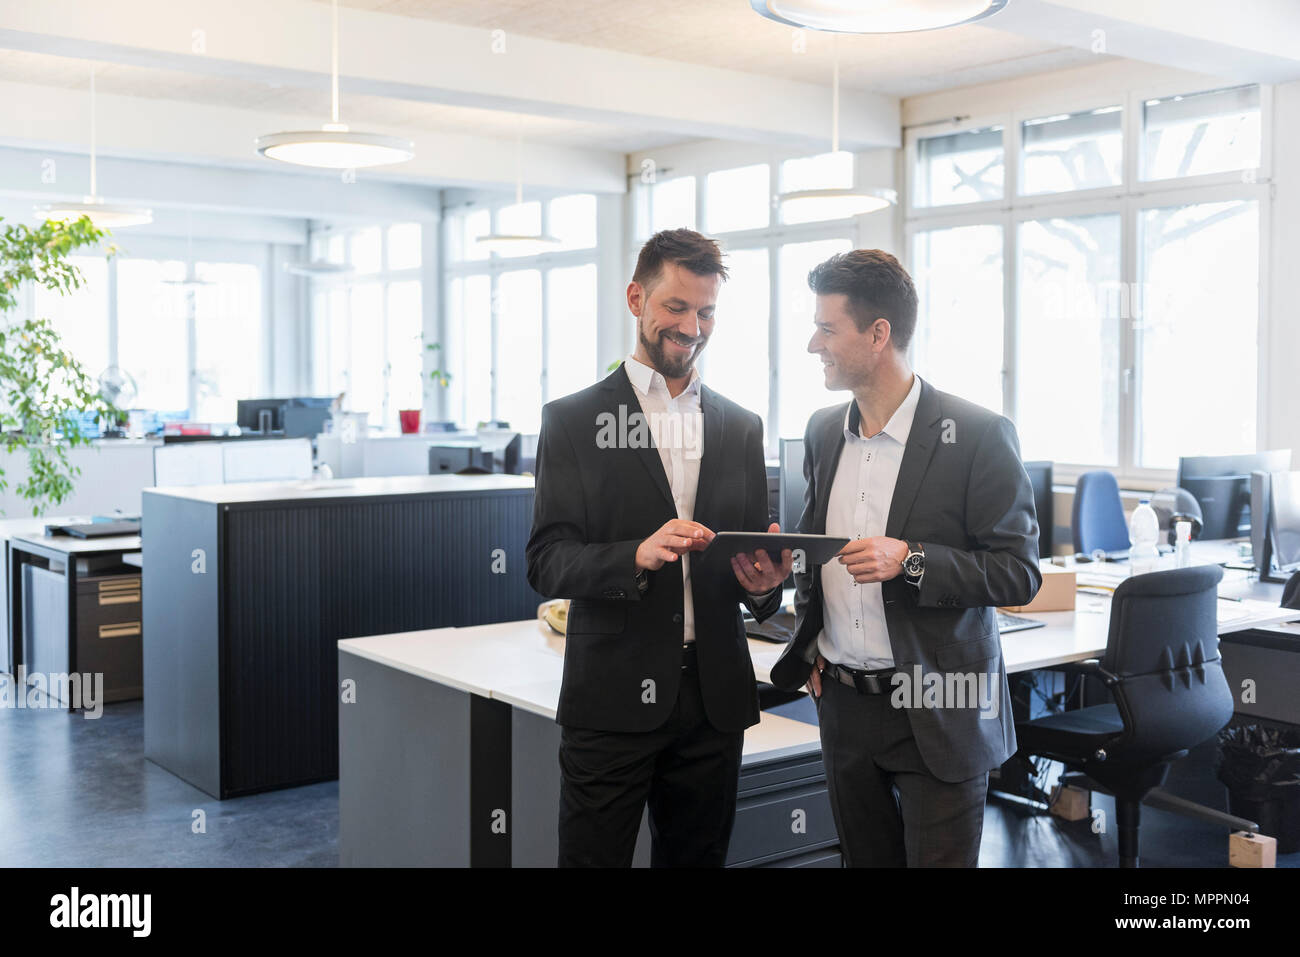 Two businessmen standing in office, discussing solutions, using digital tablet Stock Photo